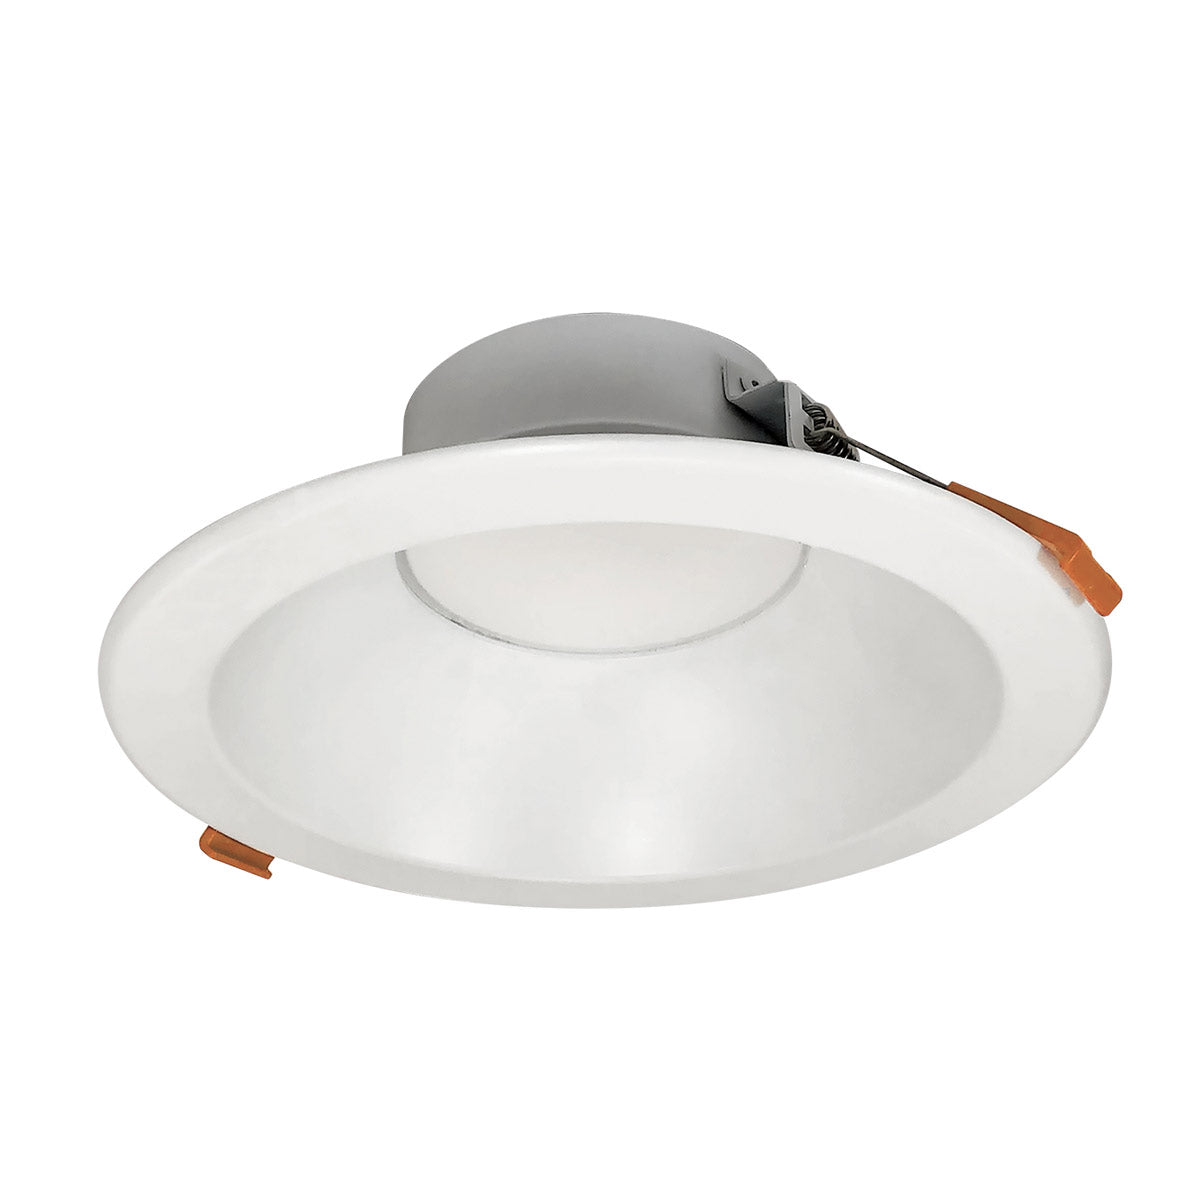 LED Downlight with Selectable CCT - Theia Series by Nora